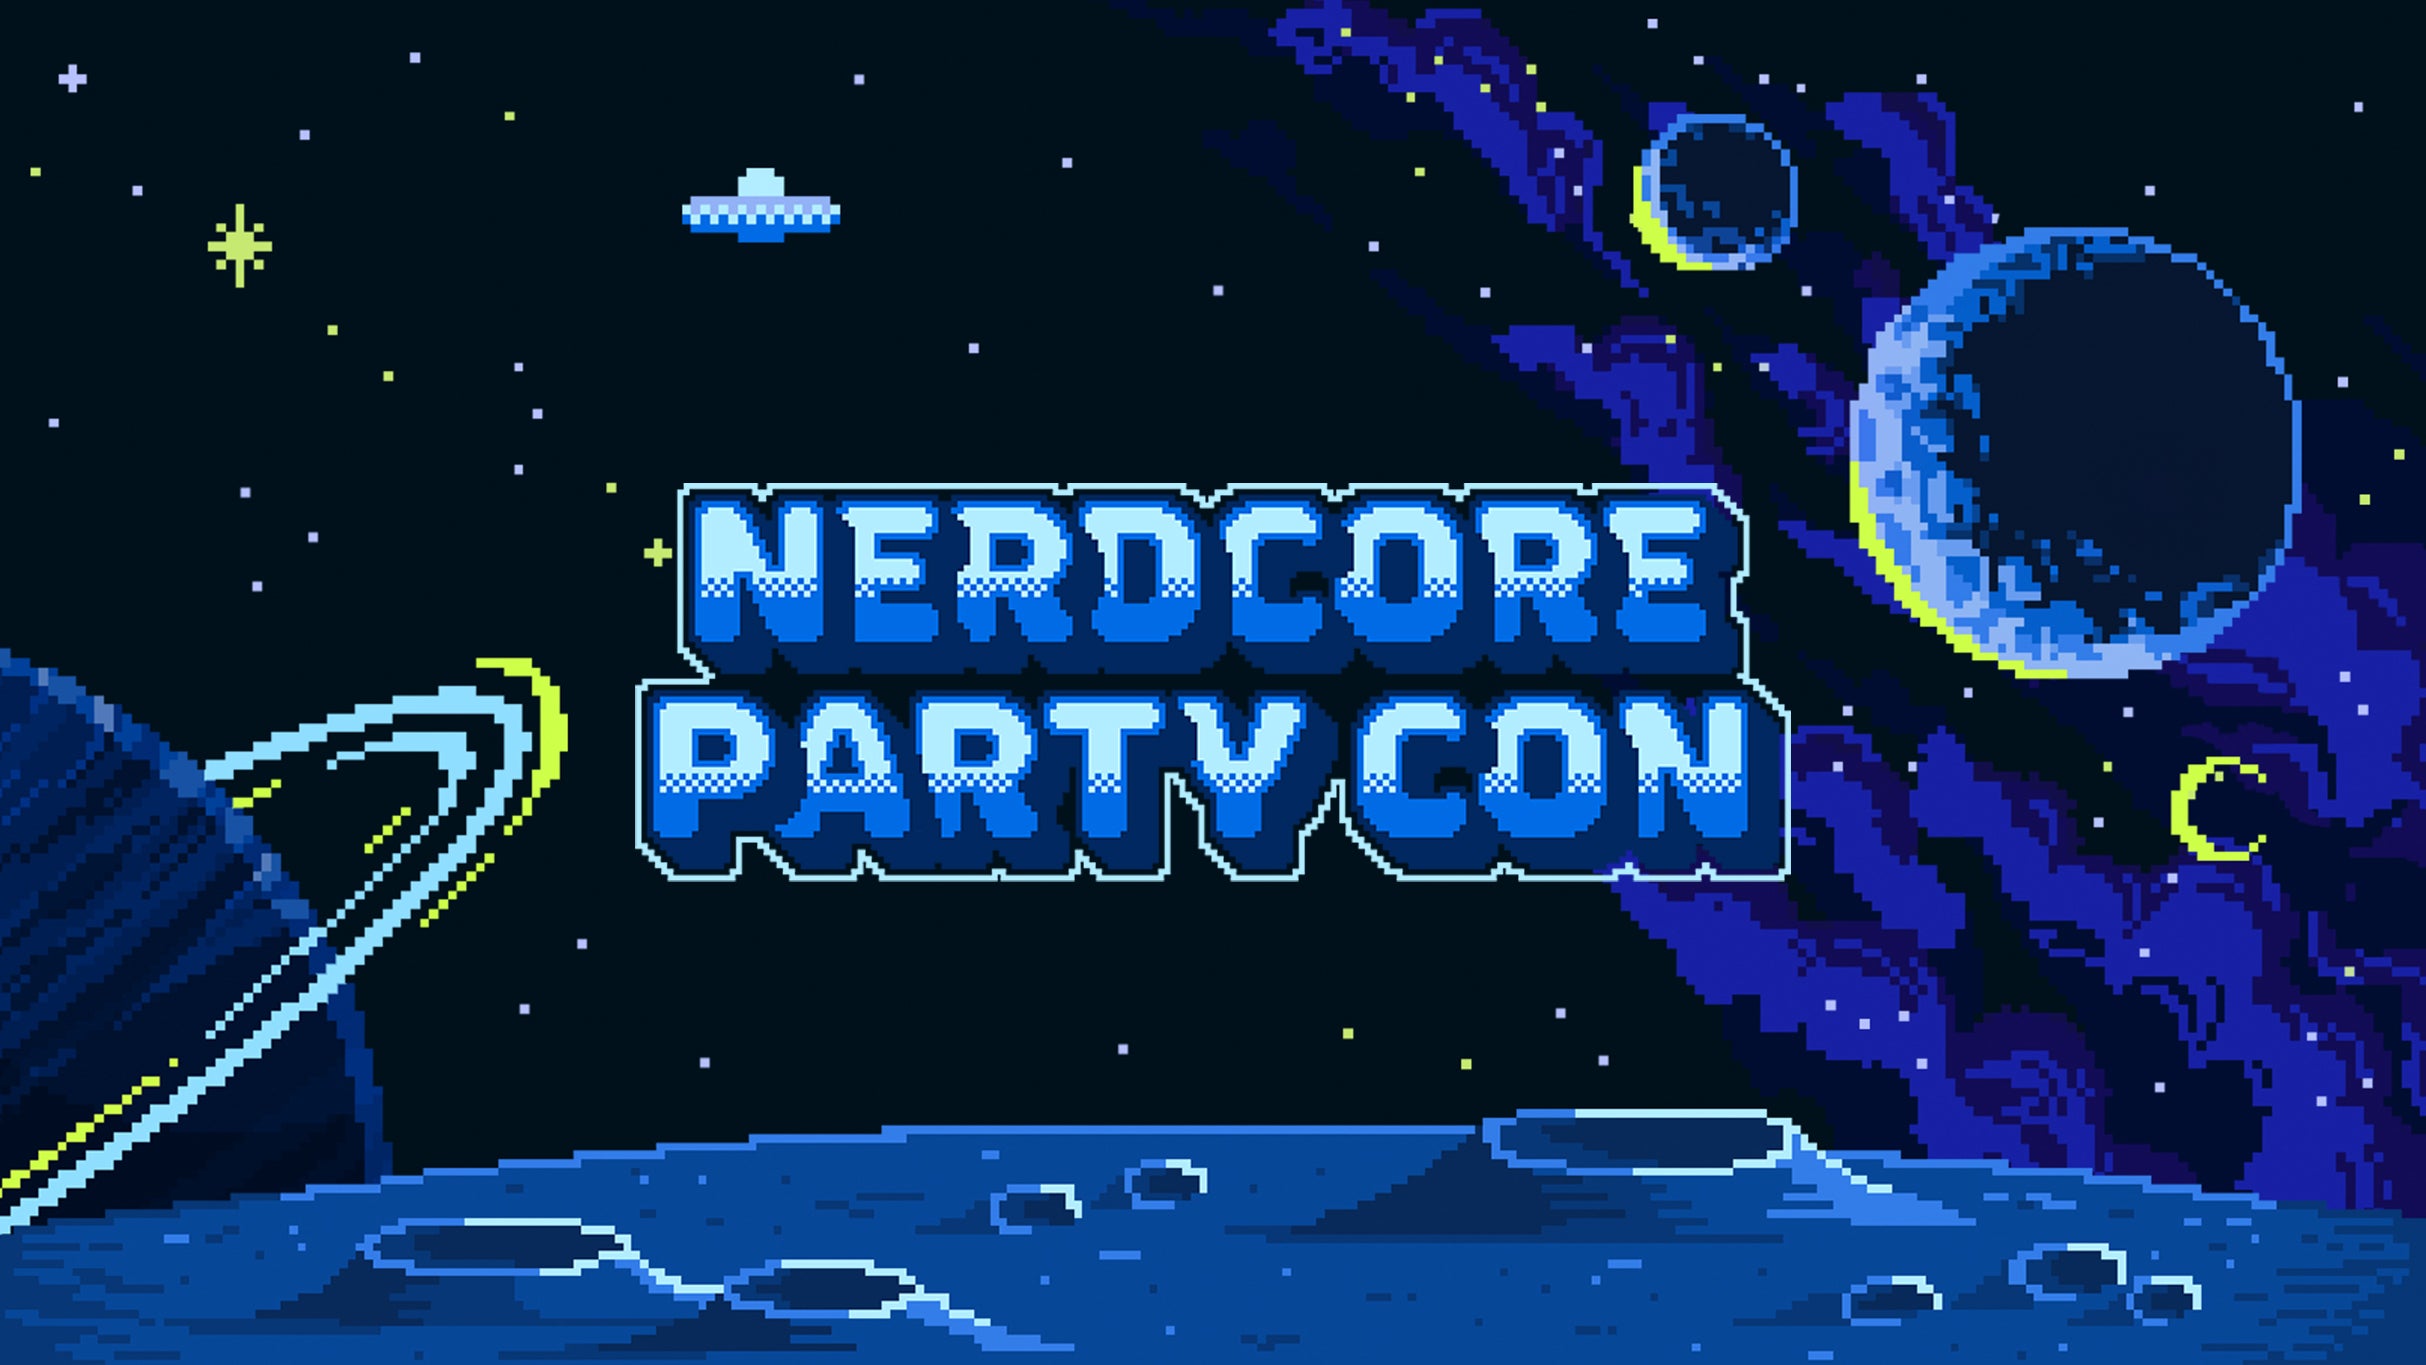 Weekend Tickets - Nerdcore Party Convention in Raleigh promo photo for Early Bird presale offer code